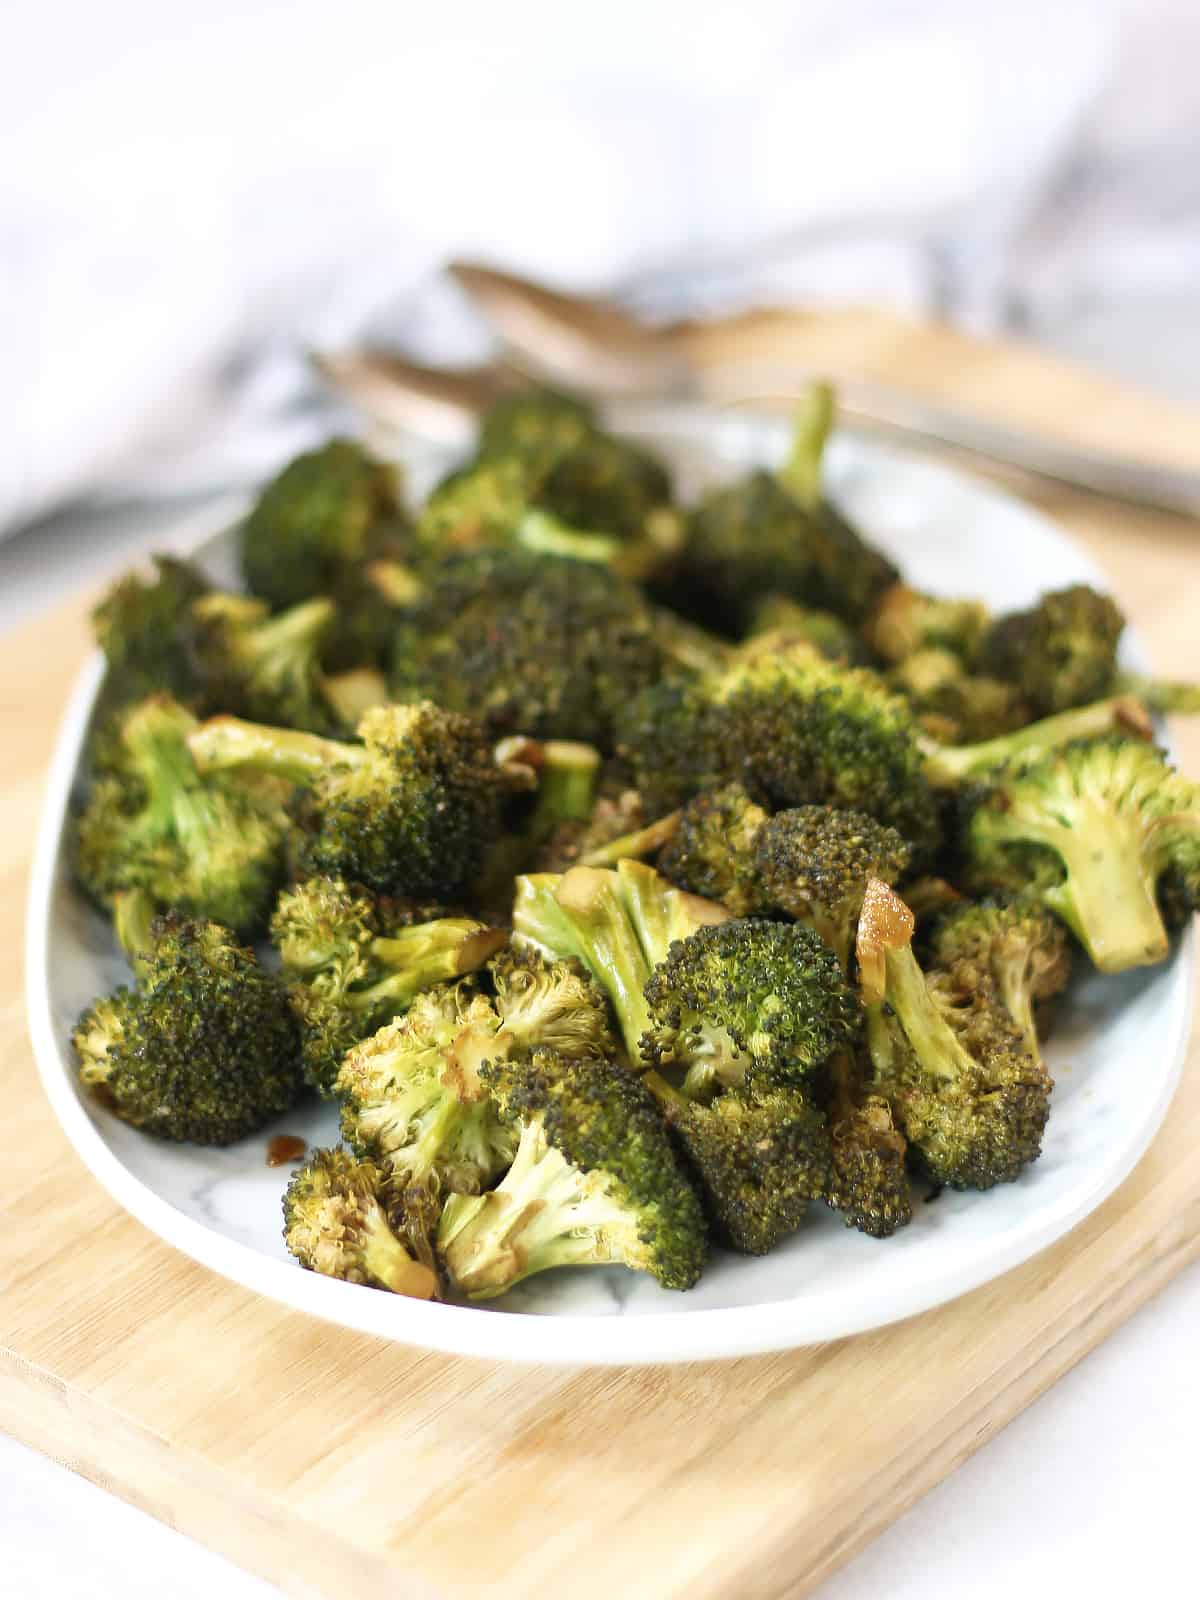 Balsamic broccoli served on a plate on a wooden chopping board.